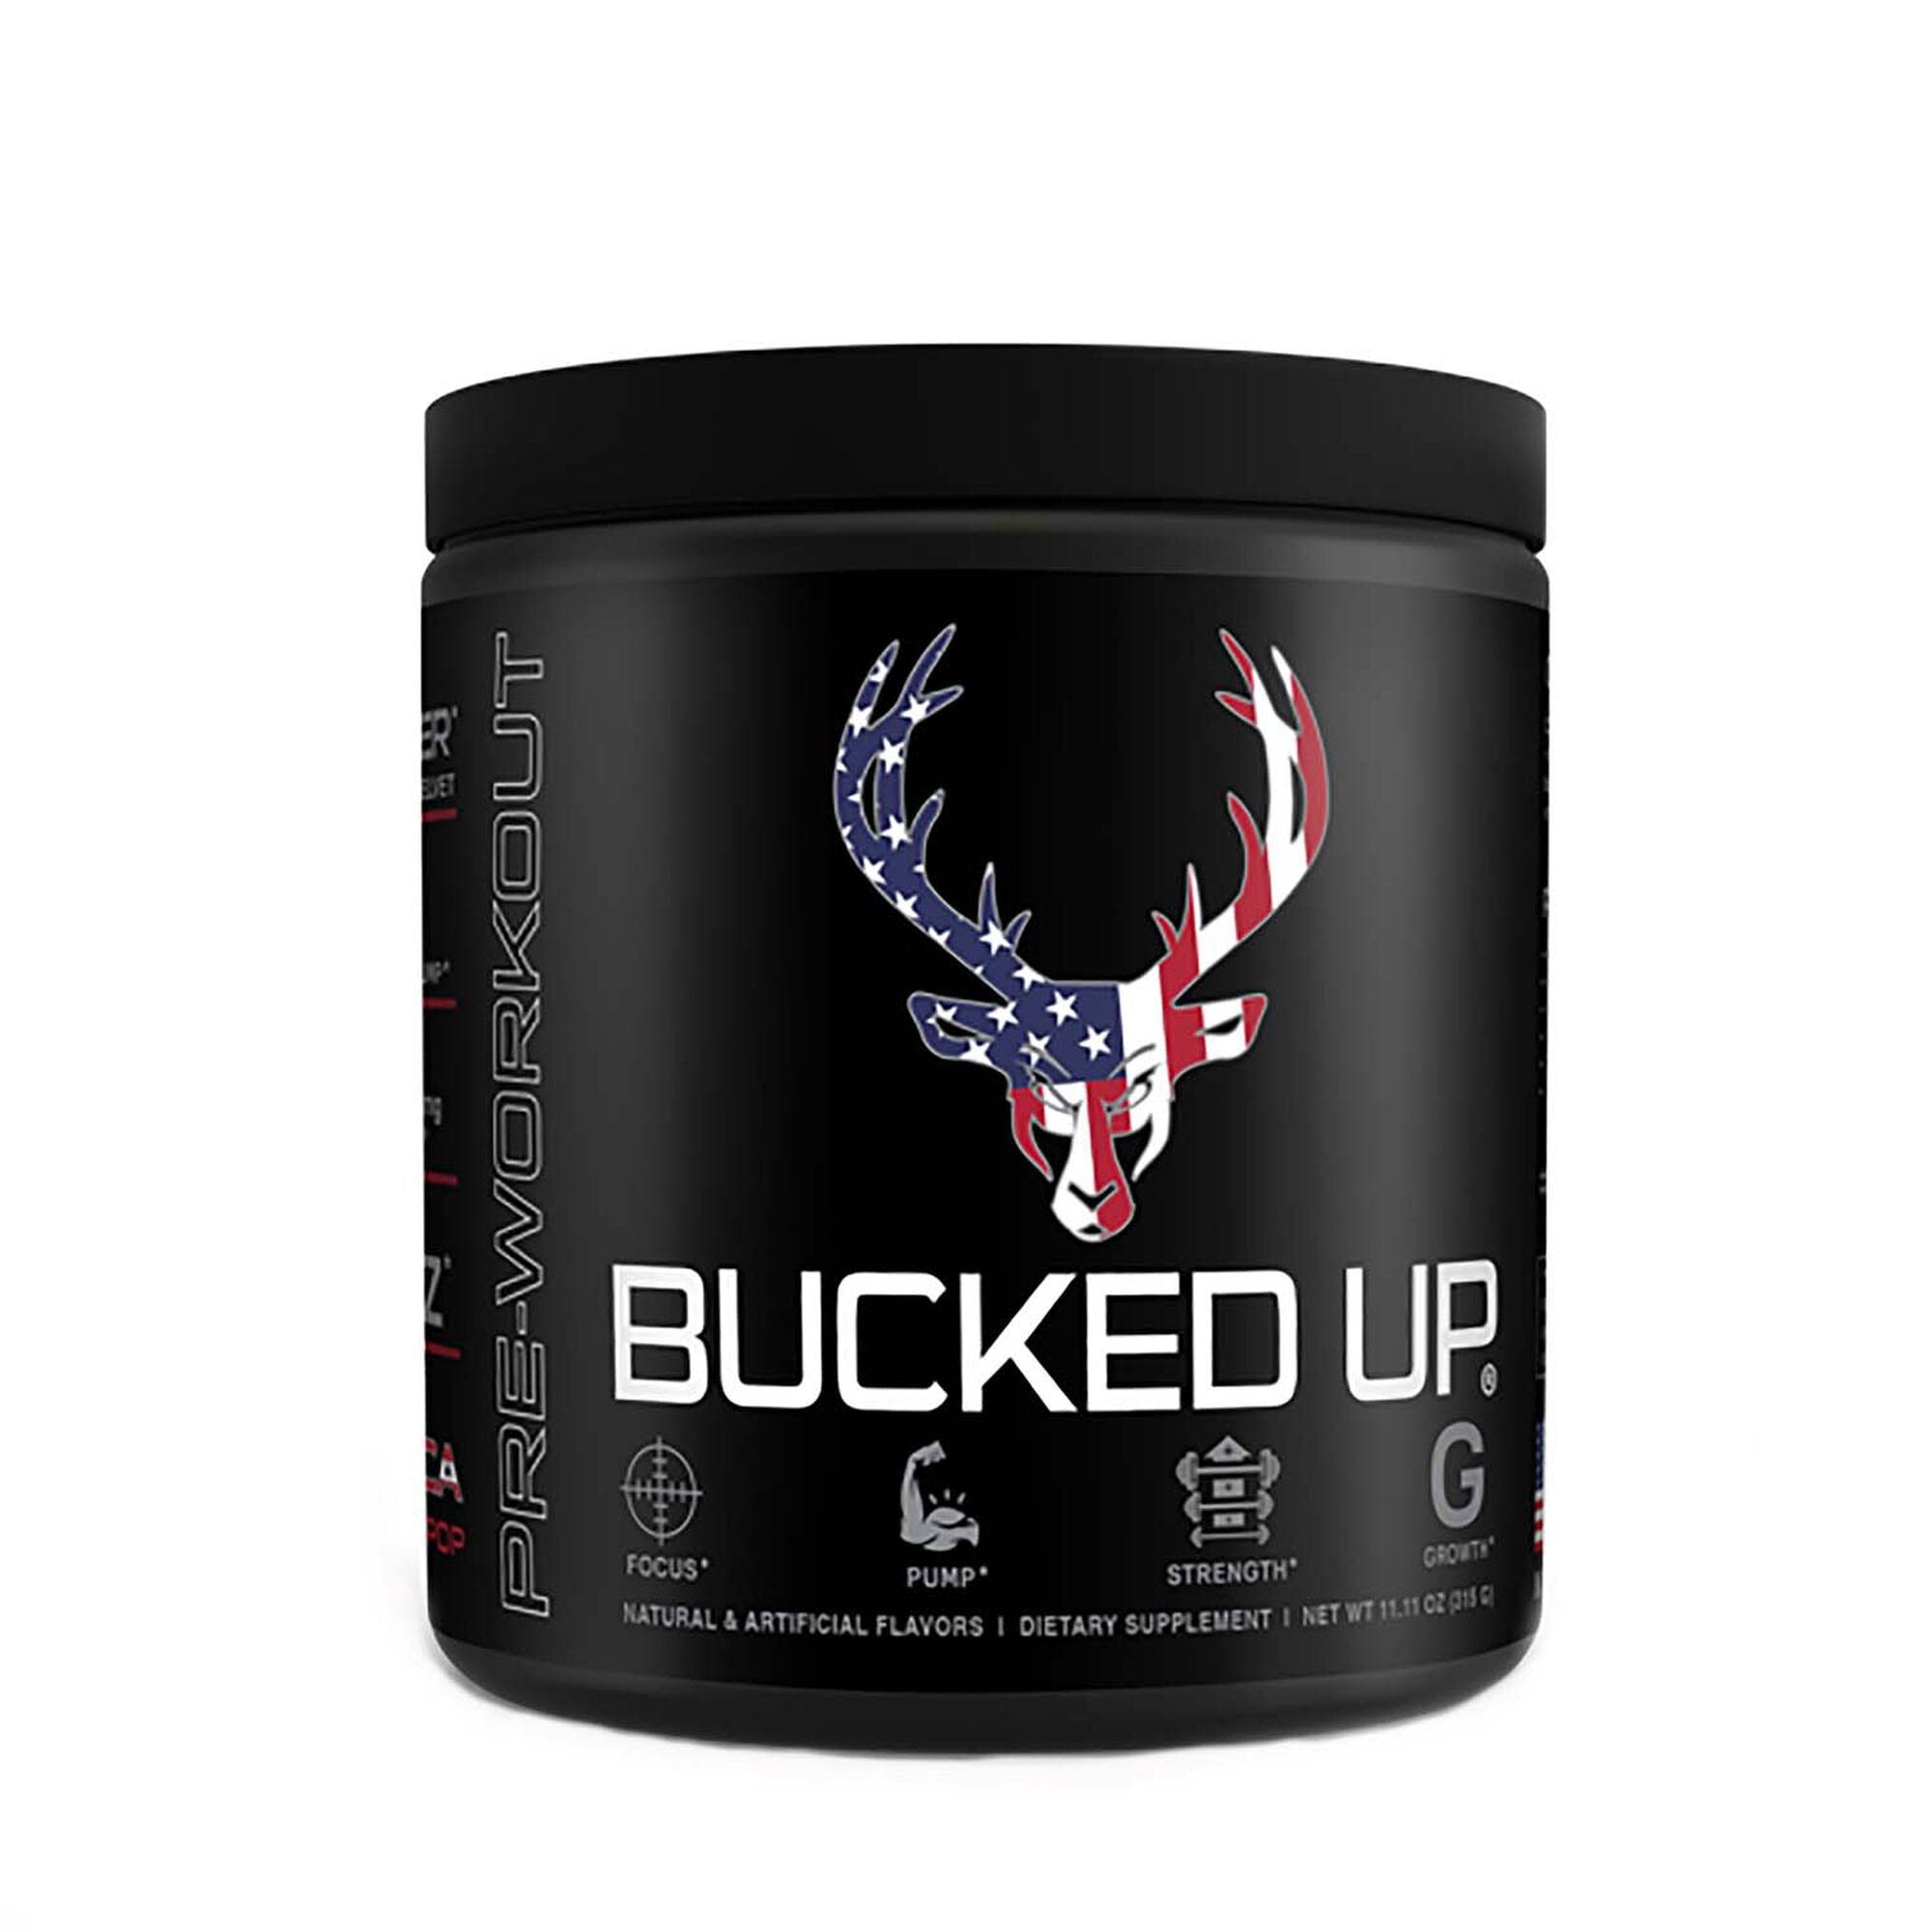 Bucked Up Pre-Workout Supplement, Blue Raspberry, Lime, Cherry - 11.02 oz